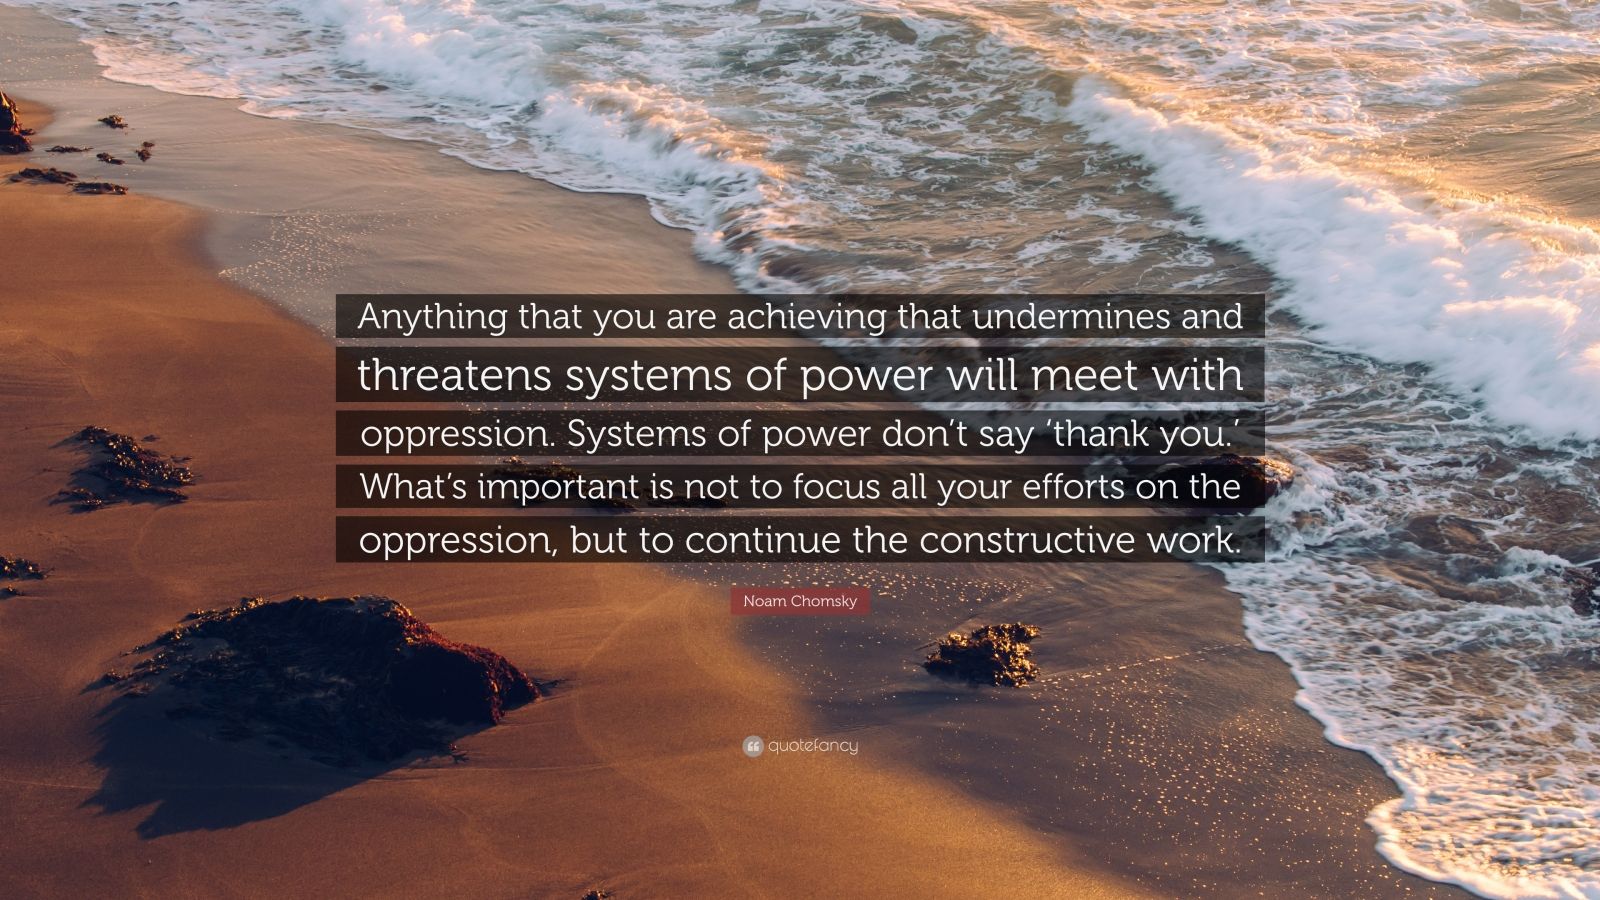 Noam Chomsky Quote “anything That You Are Achieving That Undermines And Threatens Systems Of